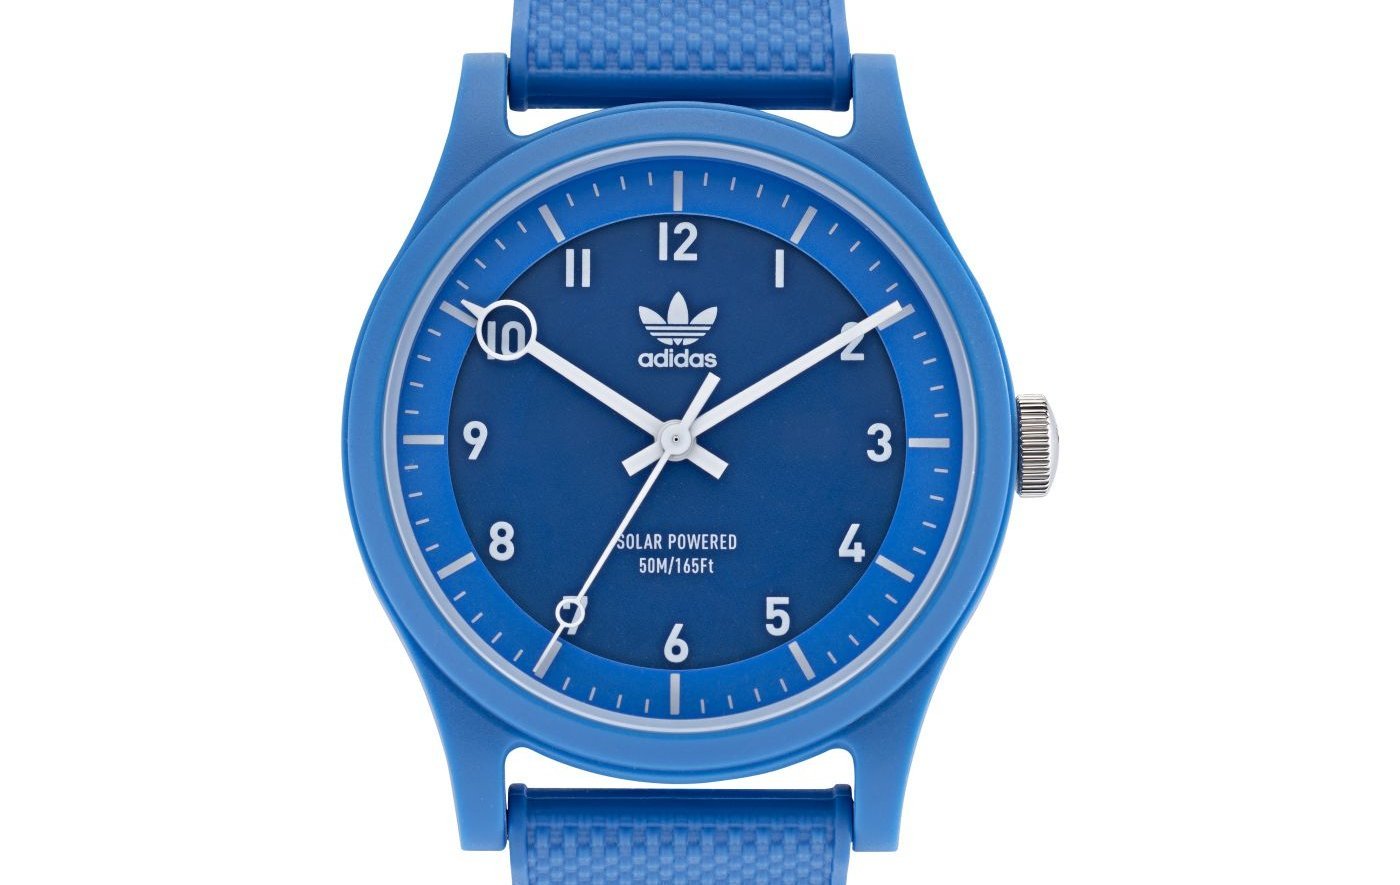 Timex Group launches new campaign for Adidas Originals Timepieces